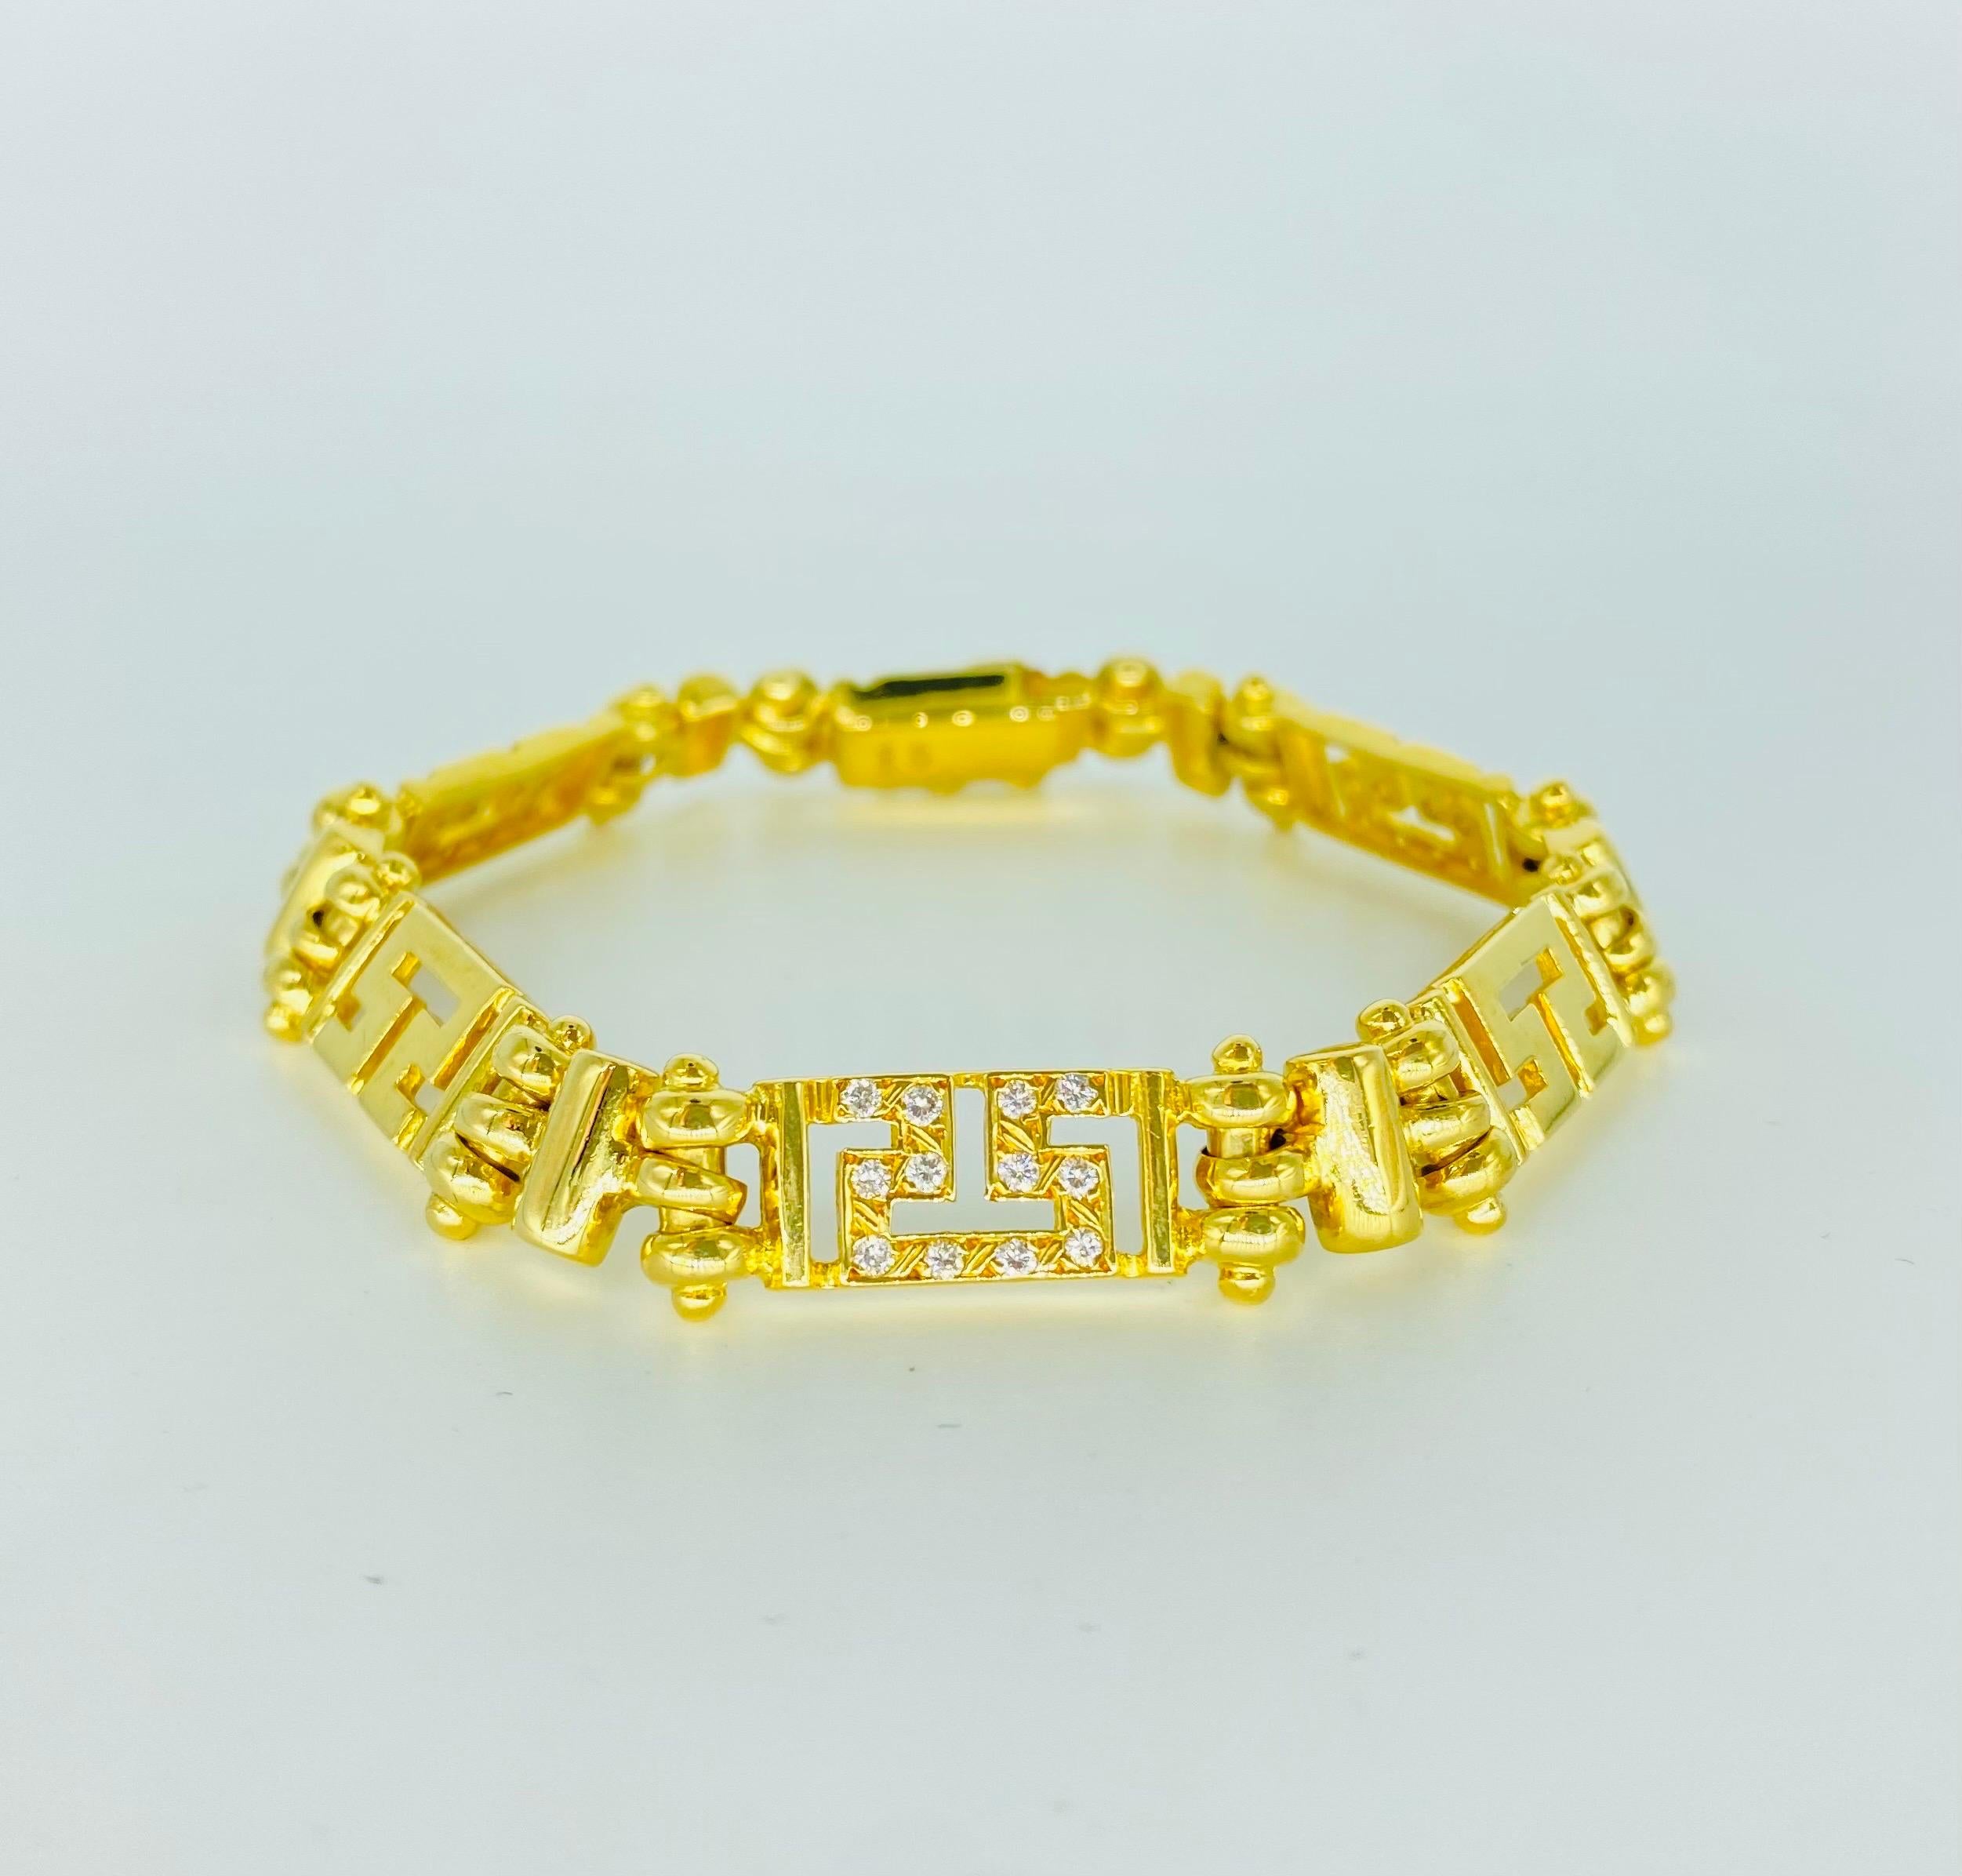 Vintage Heavy 10mm 0.72 Carat Diamonds Fancy Link Bracelet 18k Gold. The bracelet features 36 round brilliant diamonds, each weighting approx 0.02ct each for a total carat weight of 0.72ct. The bracelet’s width is 10mm and is 7.5 inches long. Very